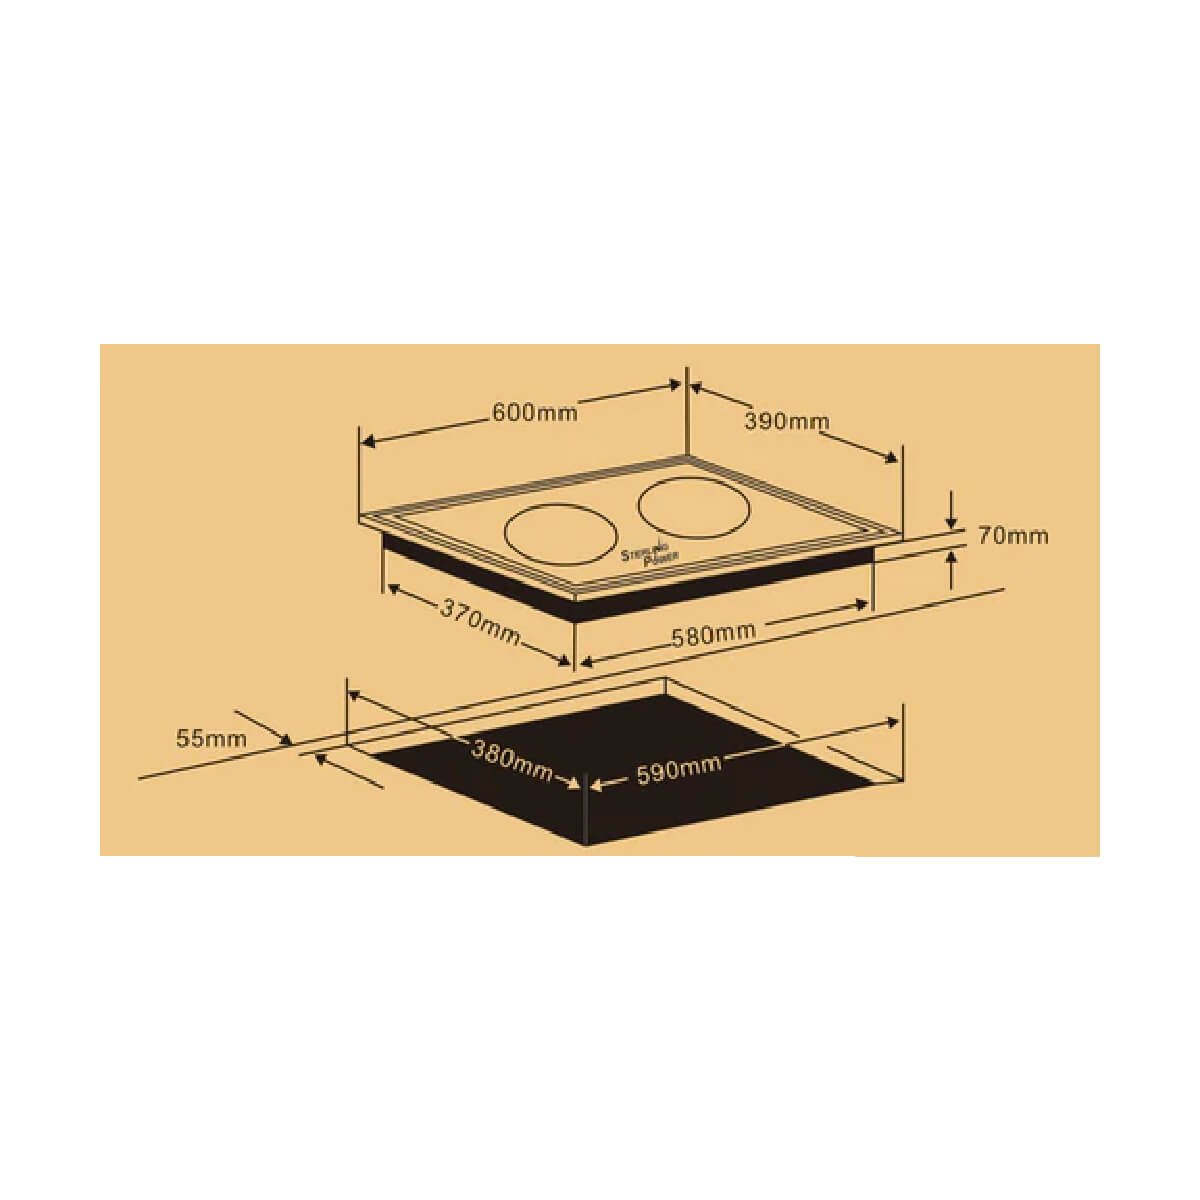 Illustration of stove installation dimensions with measurements in millimeters, featuring a Sterling Power Induction Hob - Fixed‚ Side-by-Side Twin Rings for modern kitchen setups.